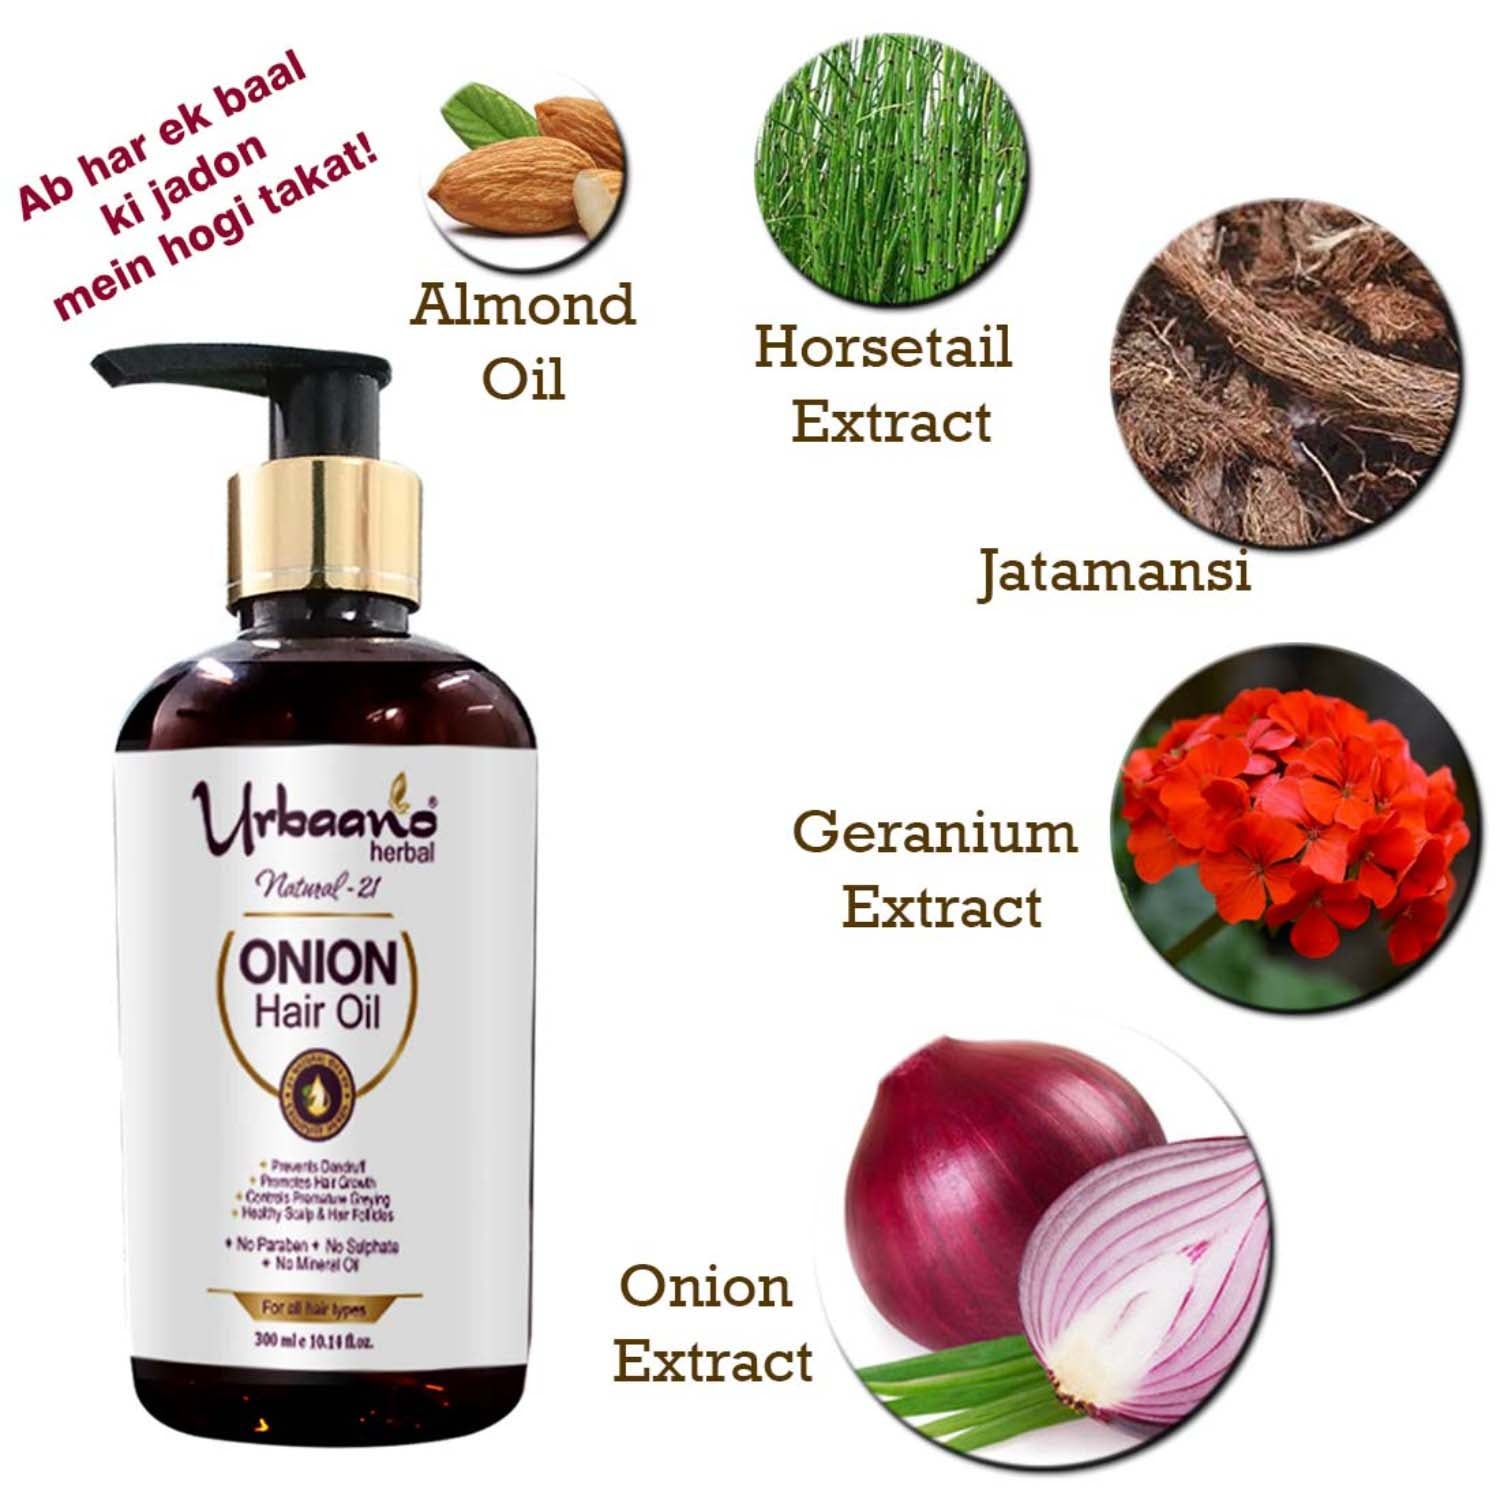 urbaano herbal hair care kit, onion hair oil infused with 21 extrcts & oil including horsetail, almond, jatamansi, geranium sulphate free for reducing hairfall